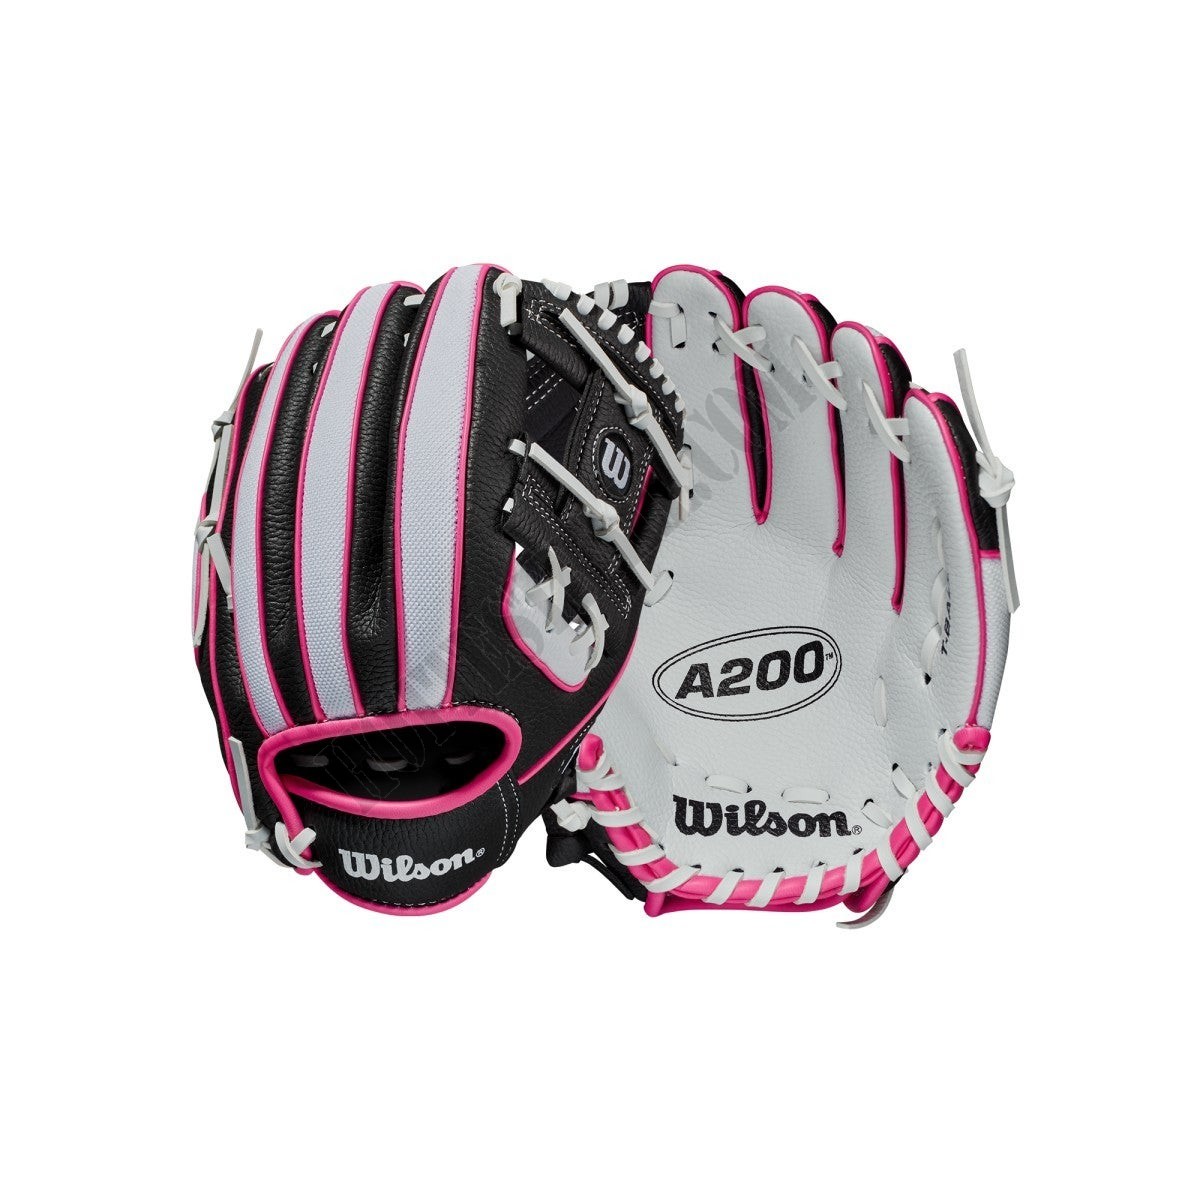 2021 A200 10" T-Ball Glove - White/Black/Pink ● Wilson Promotions - -0